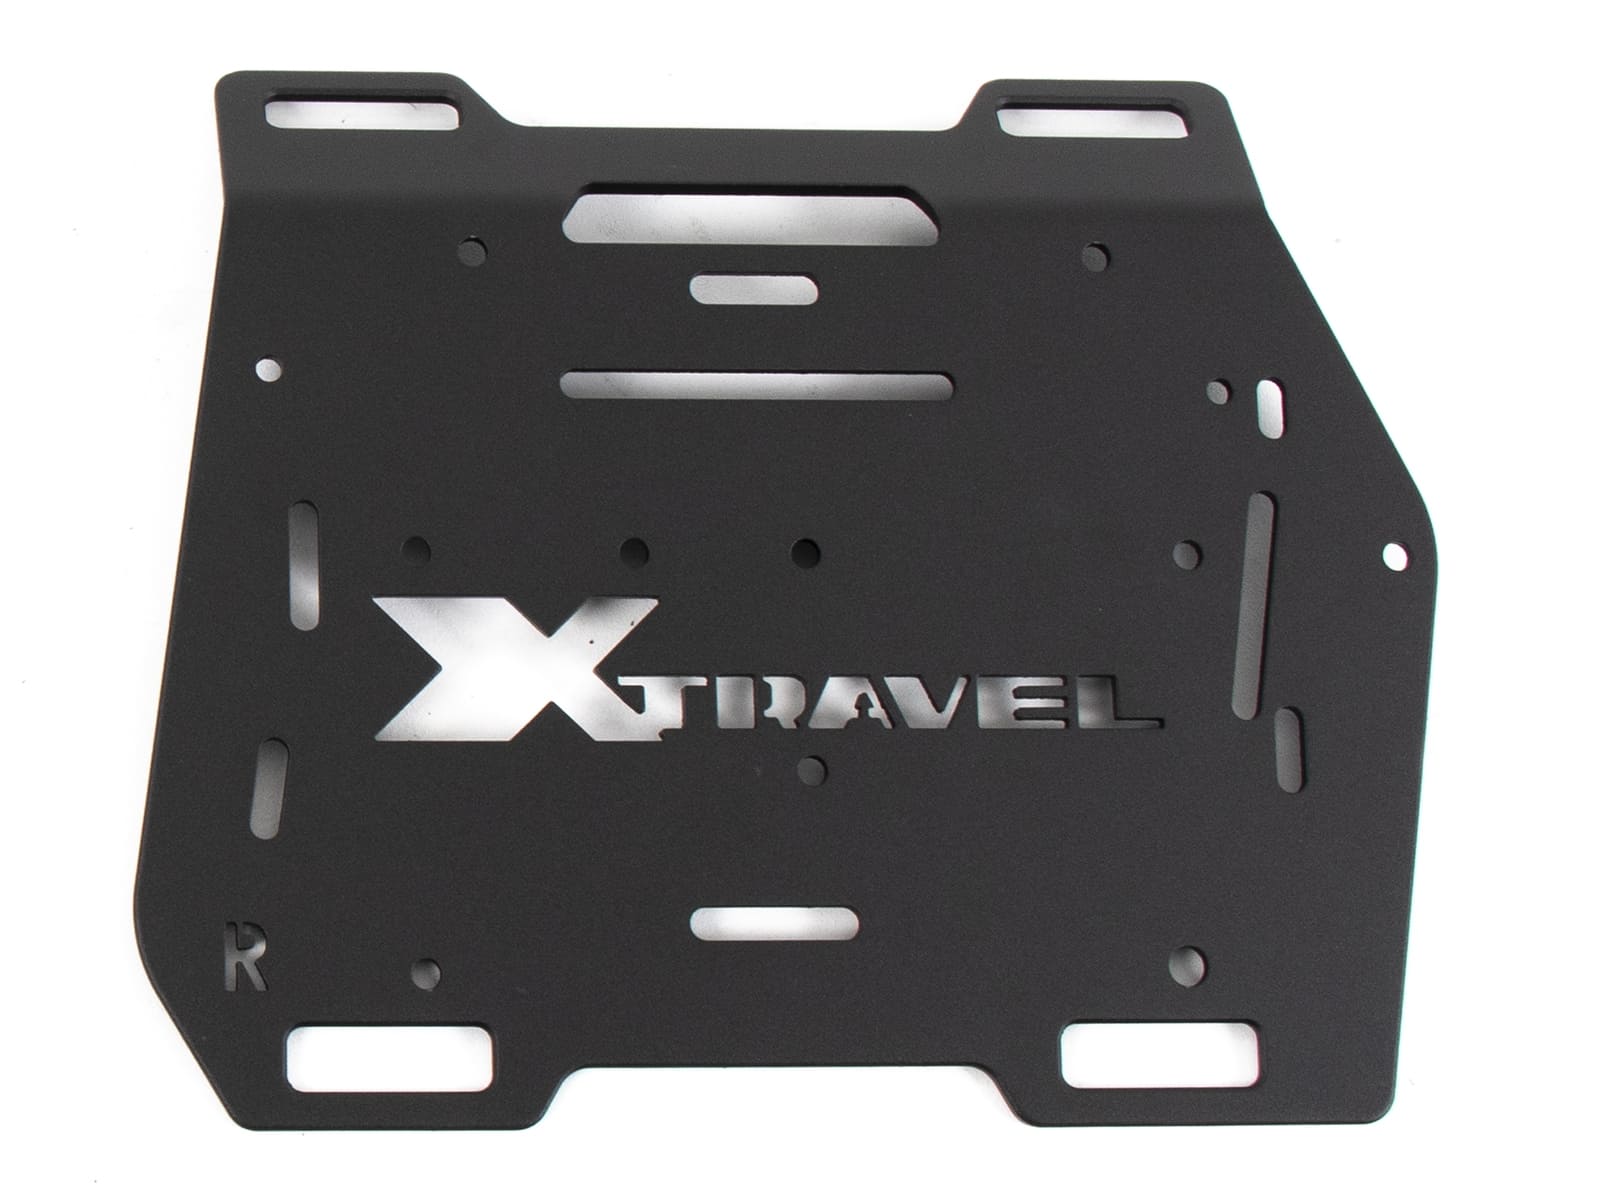 Sidebag Xtravel Basic (single bag) right side incl. 1x universal holding plate for side carrier